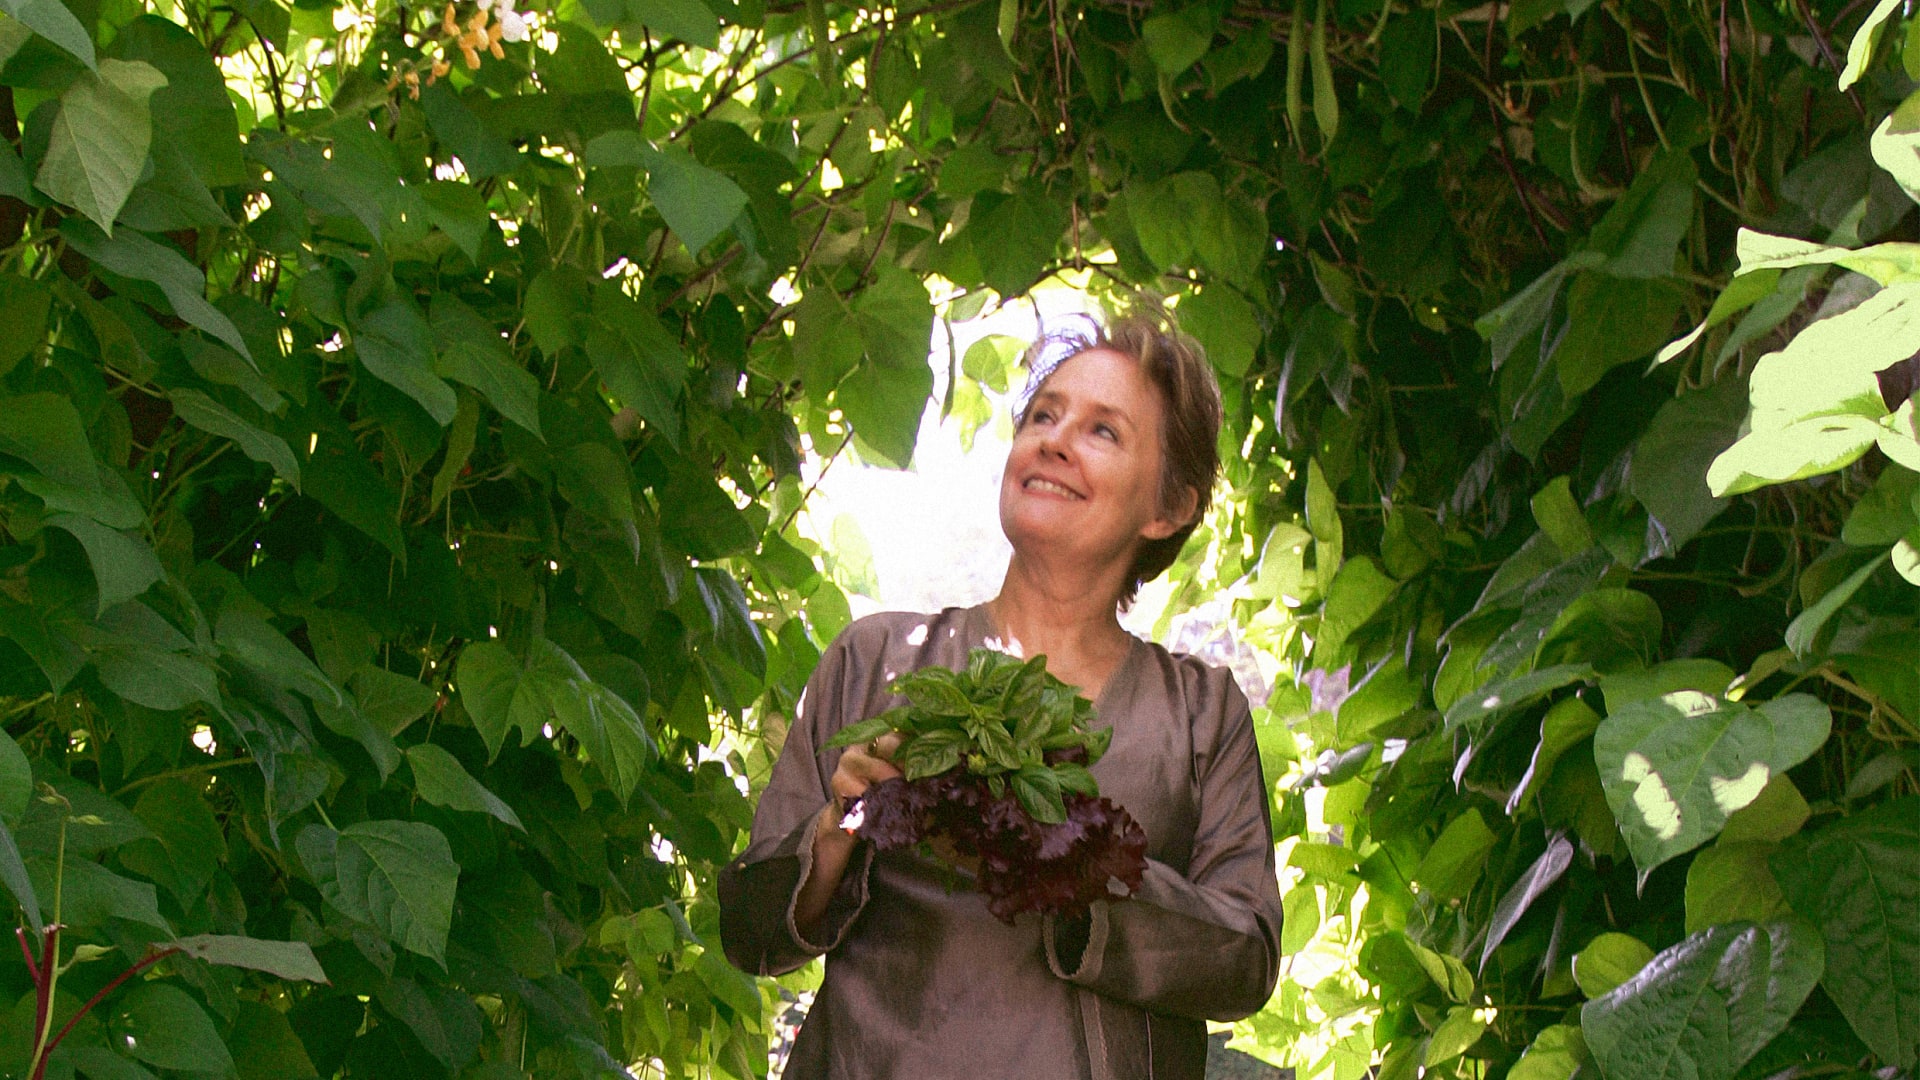 How to grow a vegetable garden, according to legendary chef Alice Waters